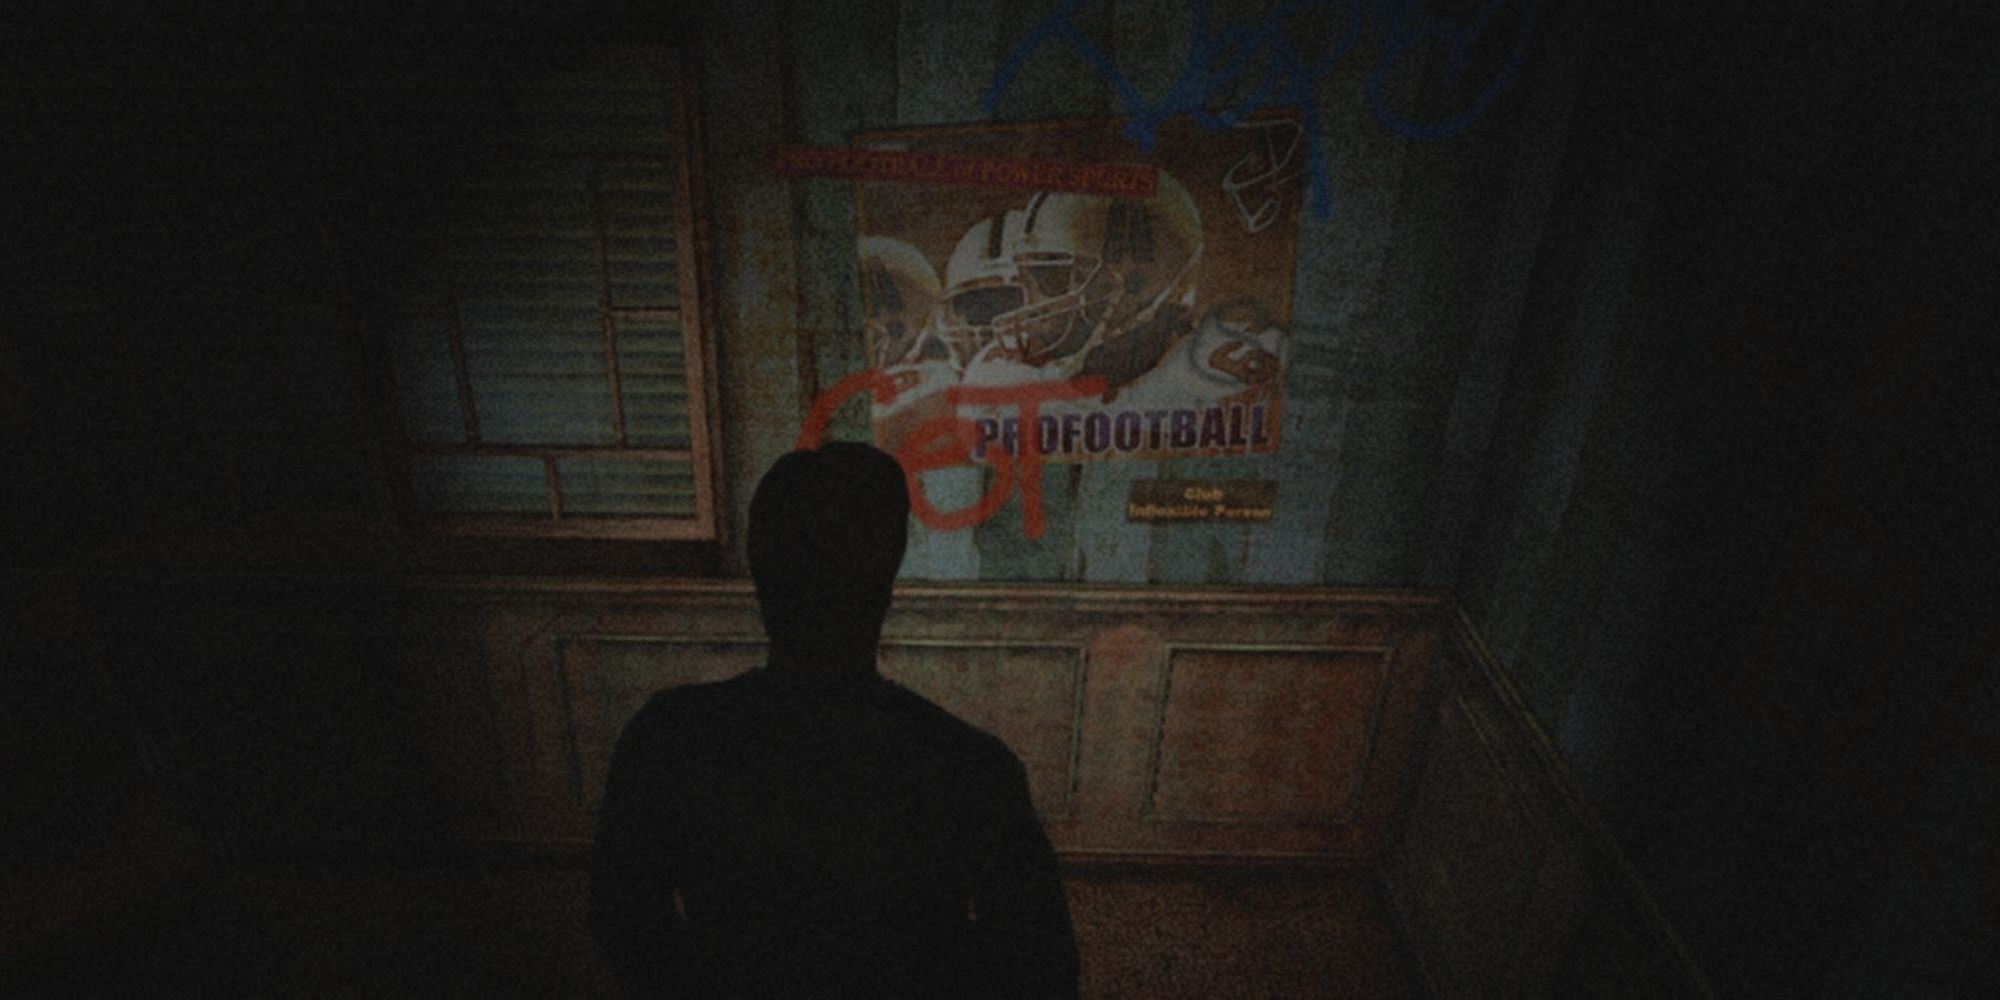 A football poster in Eddie's hidden room in Silent Hill 2.